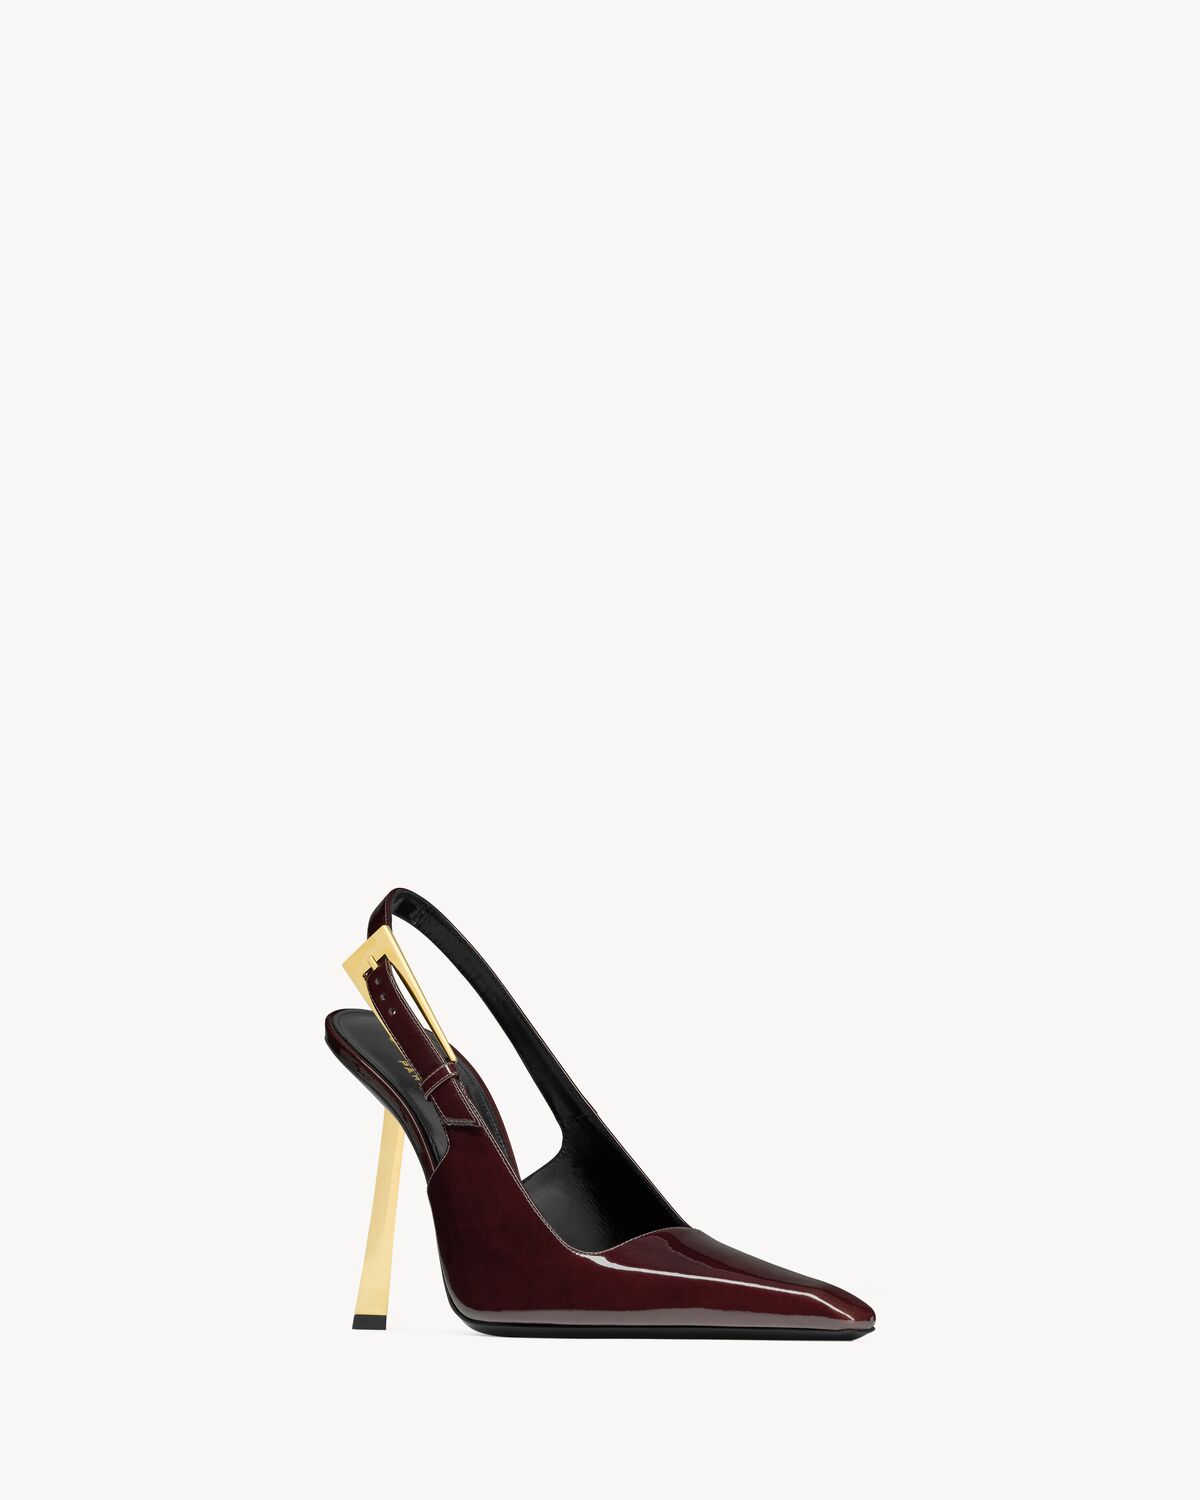 LEE slingback pumps in patent leather